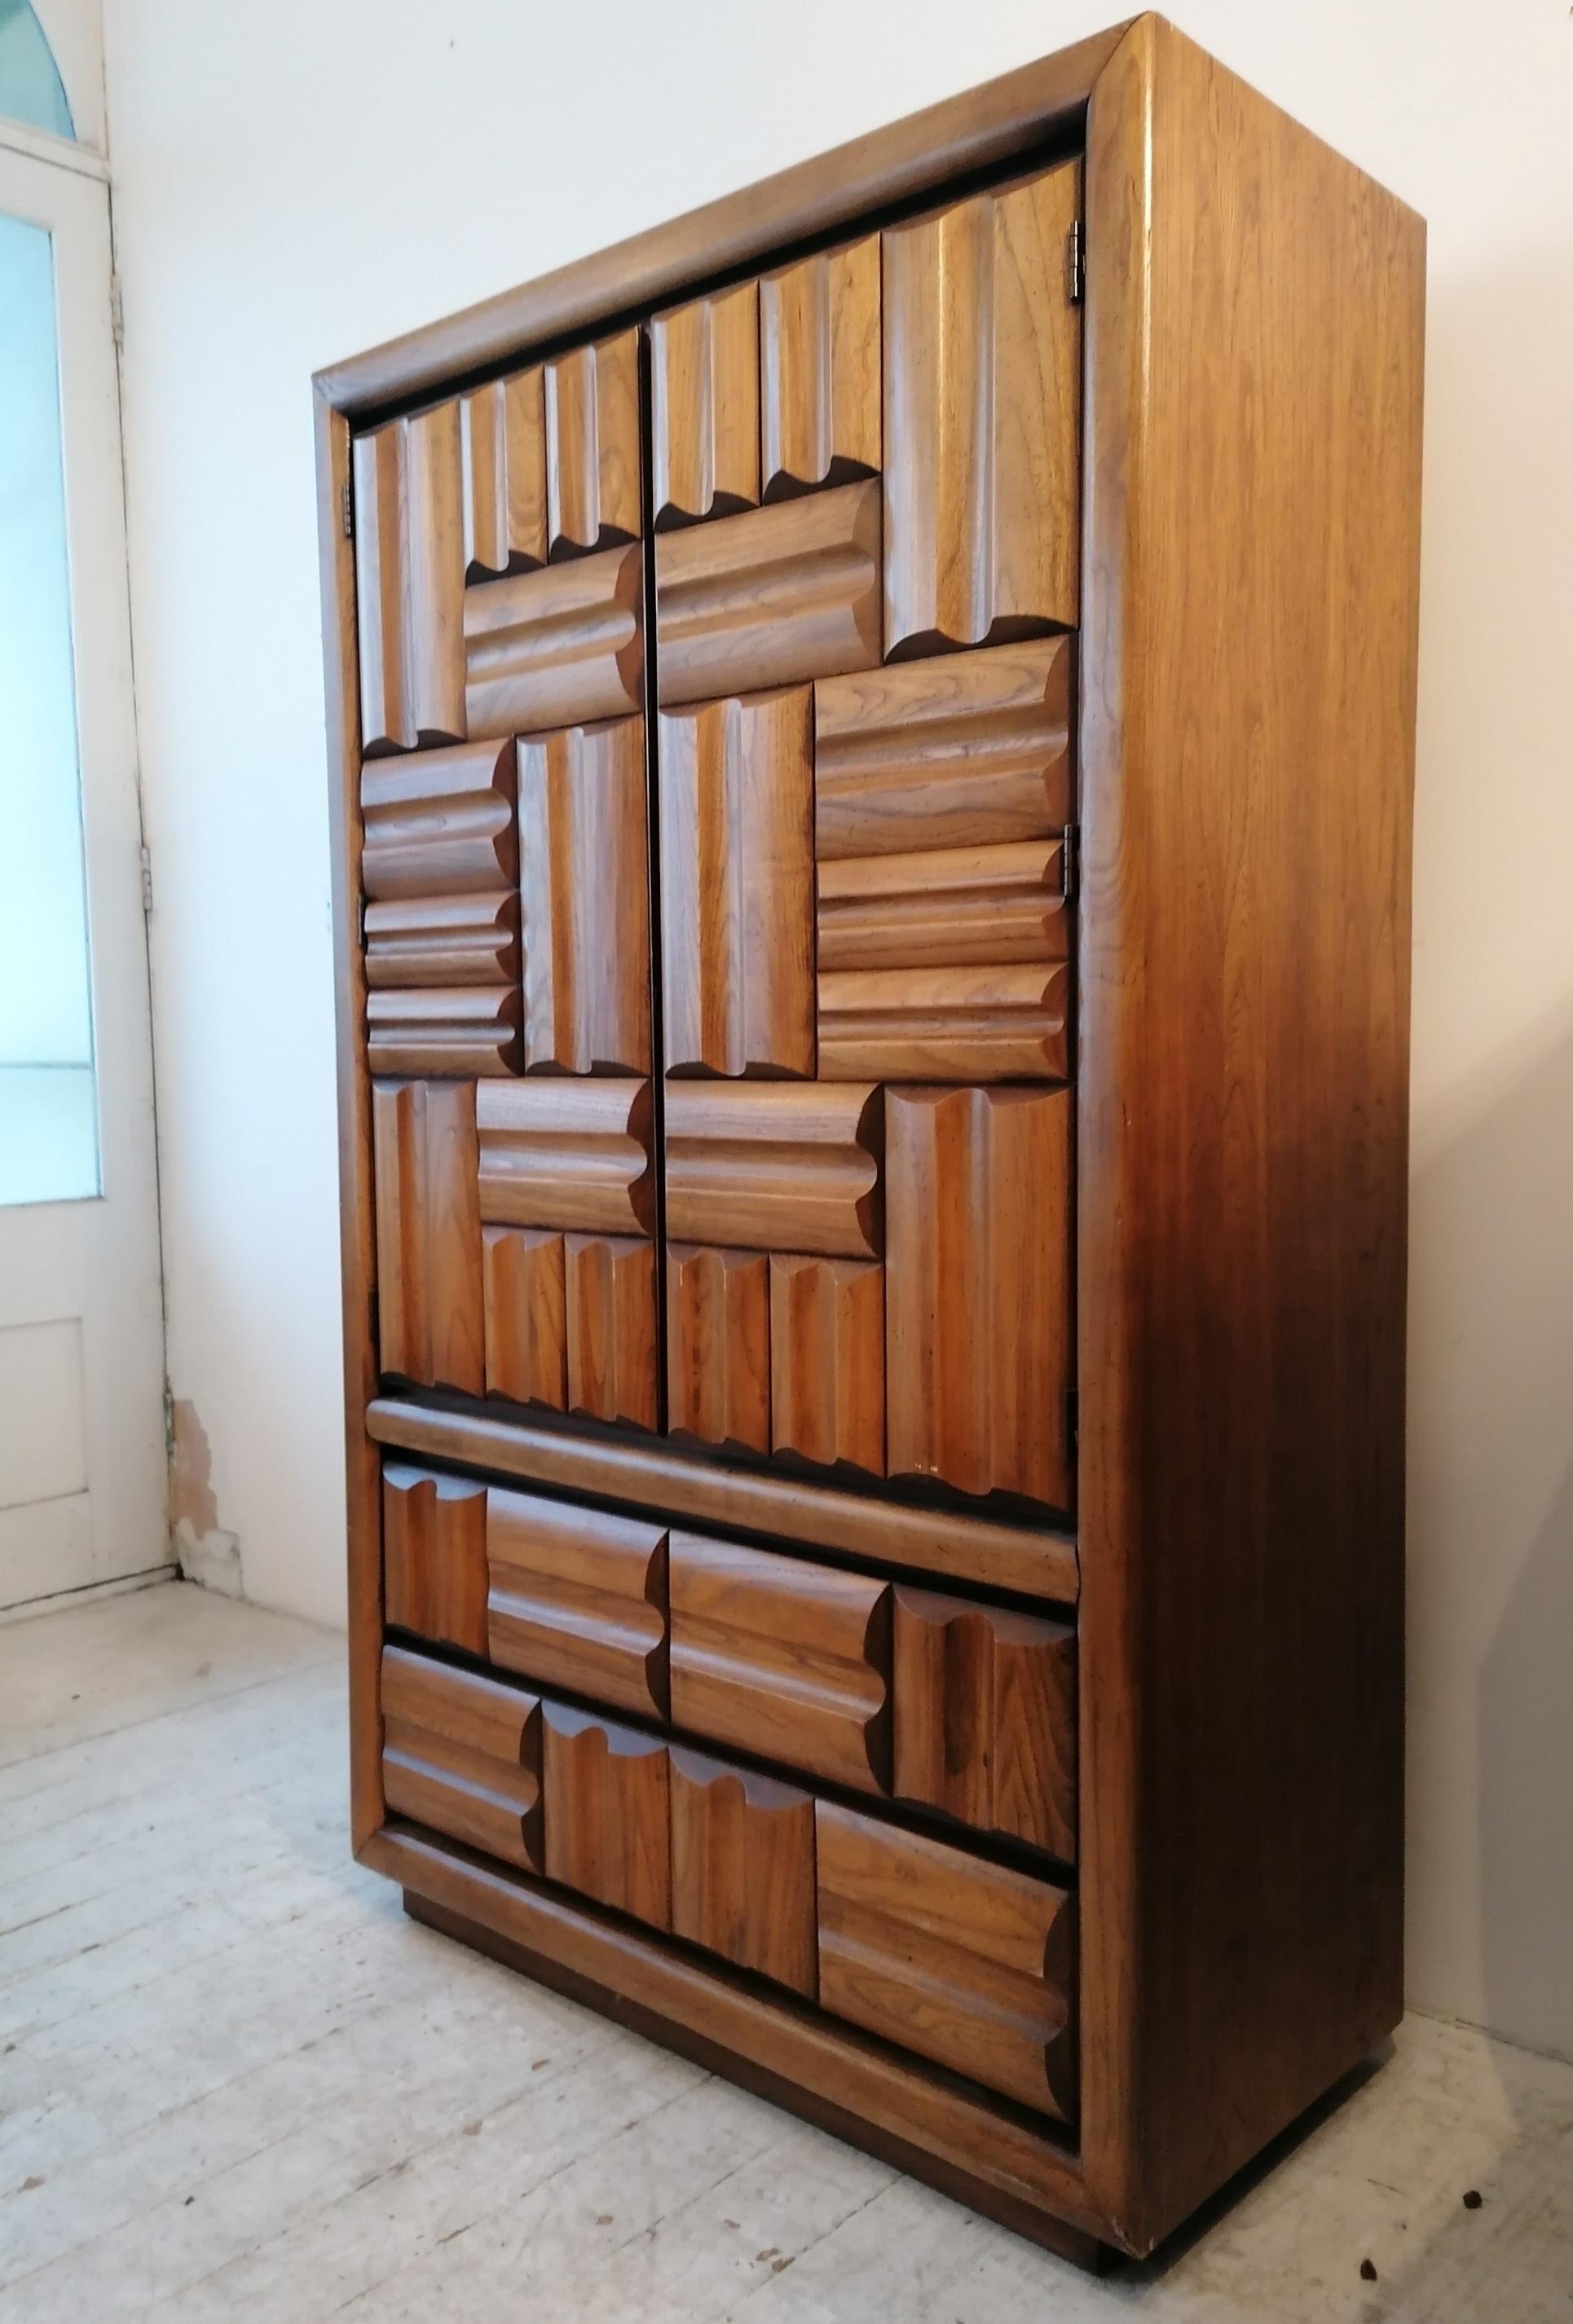 A spectacular, huge Brutalist cabinet by Lane Furniture, USA 1970s. Drawer and door fronts have a chunky, sculpted brutalist design in relief.
Two doors on the upper part open to 2 internal drawers and adjustable shelves. Below are 2 large